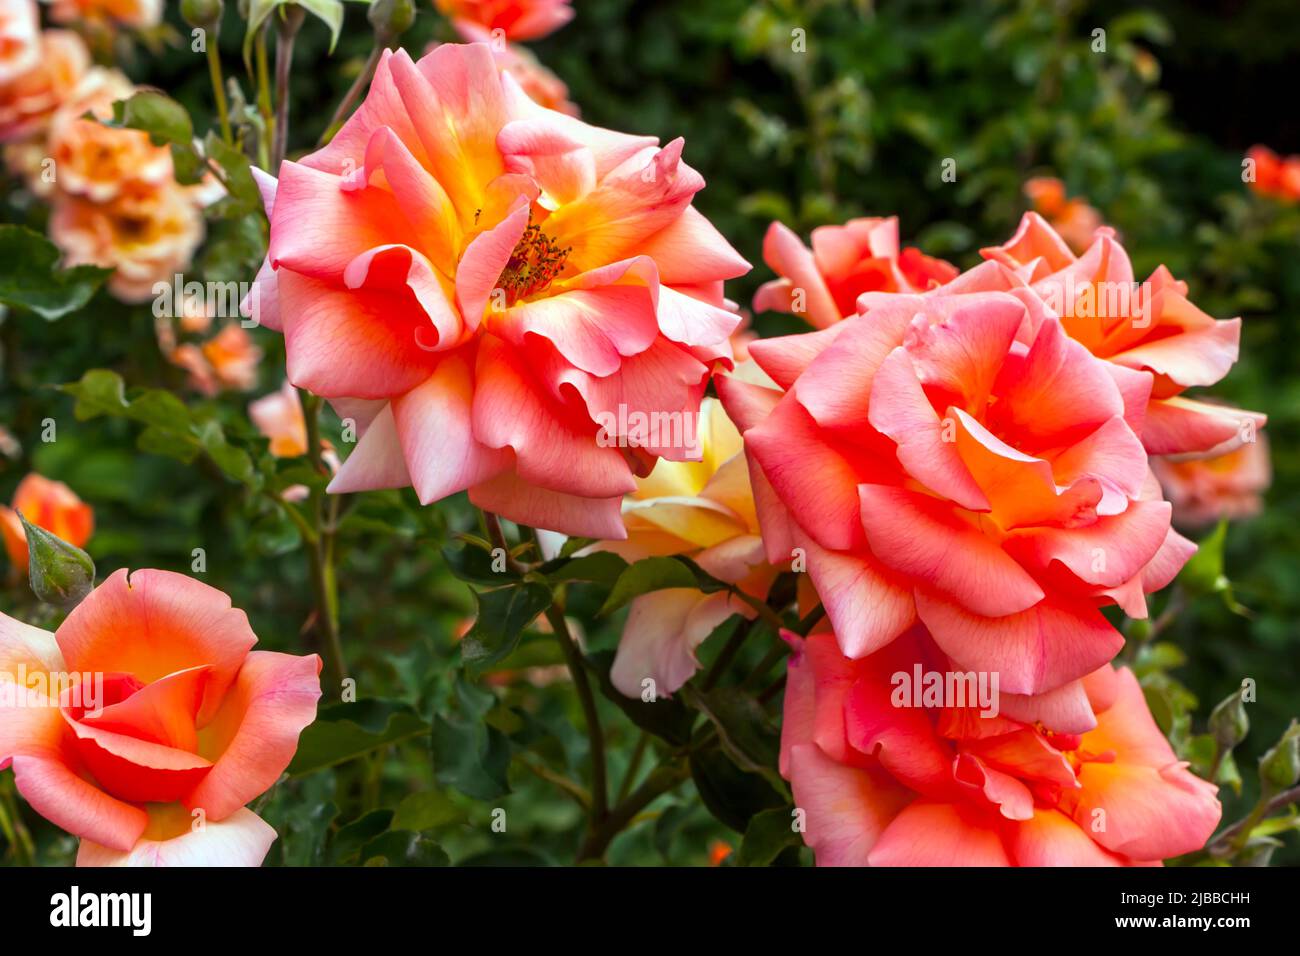 Amazing pink rose in a garden Stock Photo